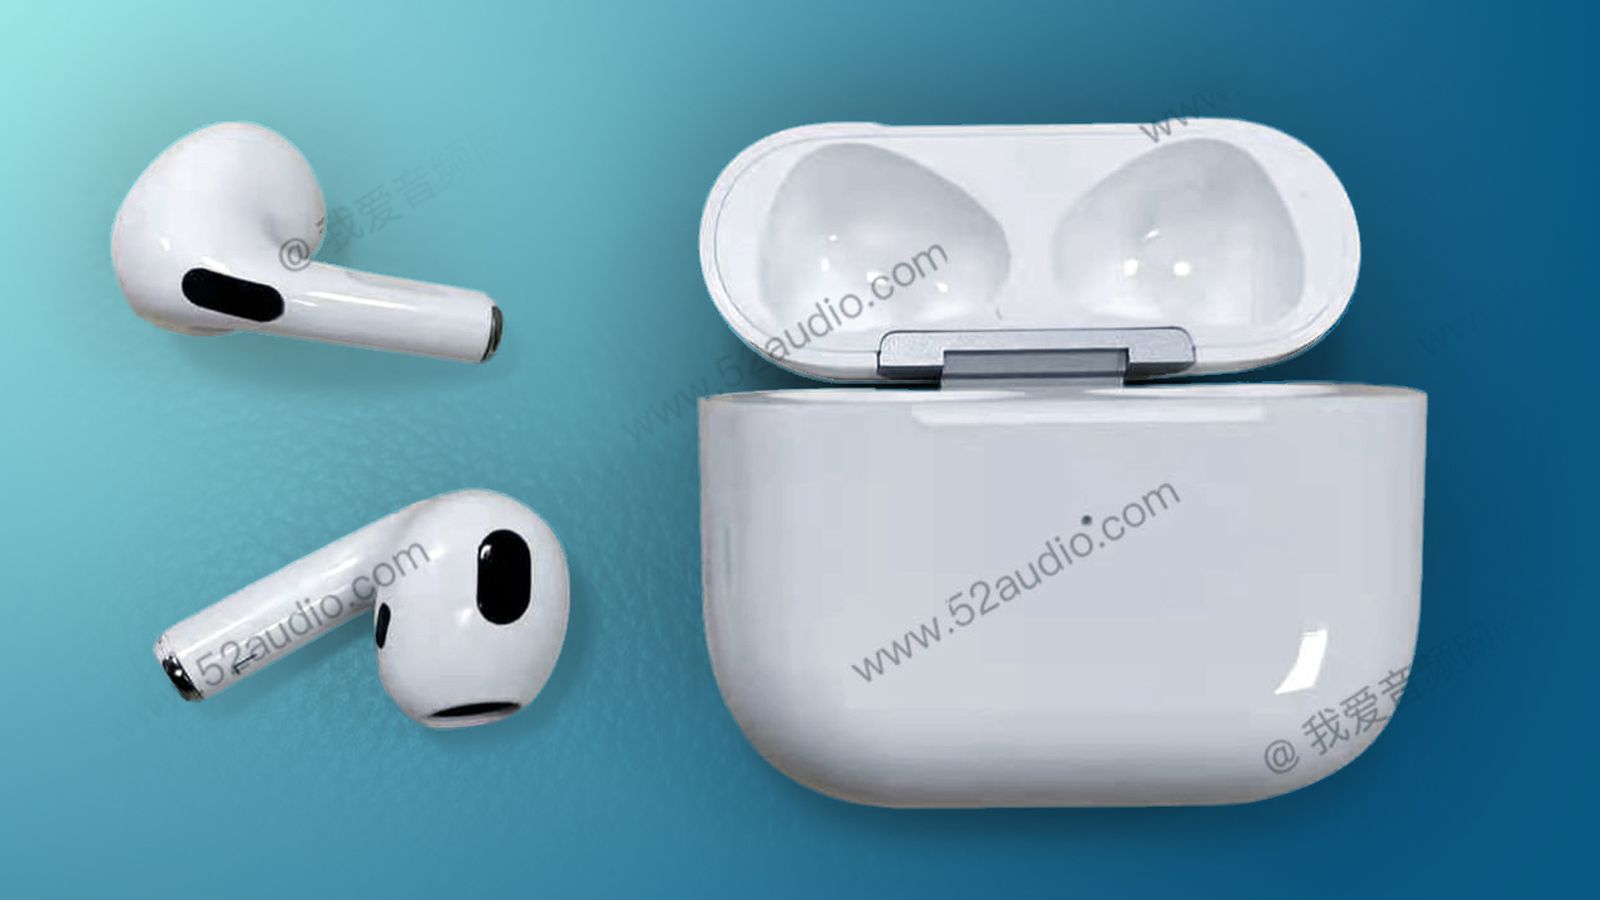 The future redefinition of AirPods 3 is shown in new images